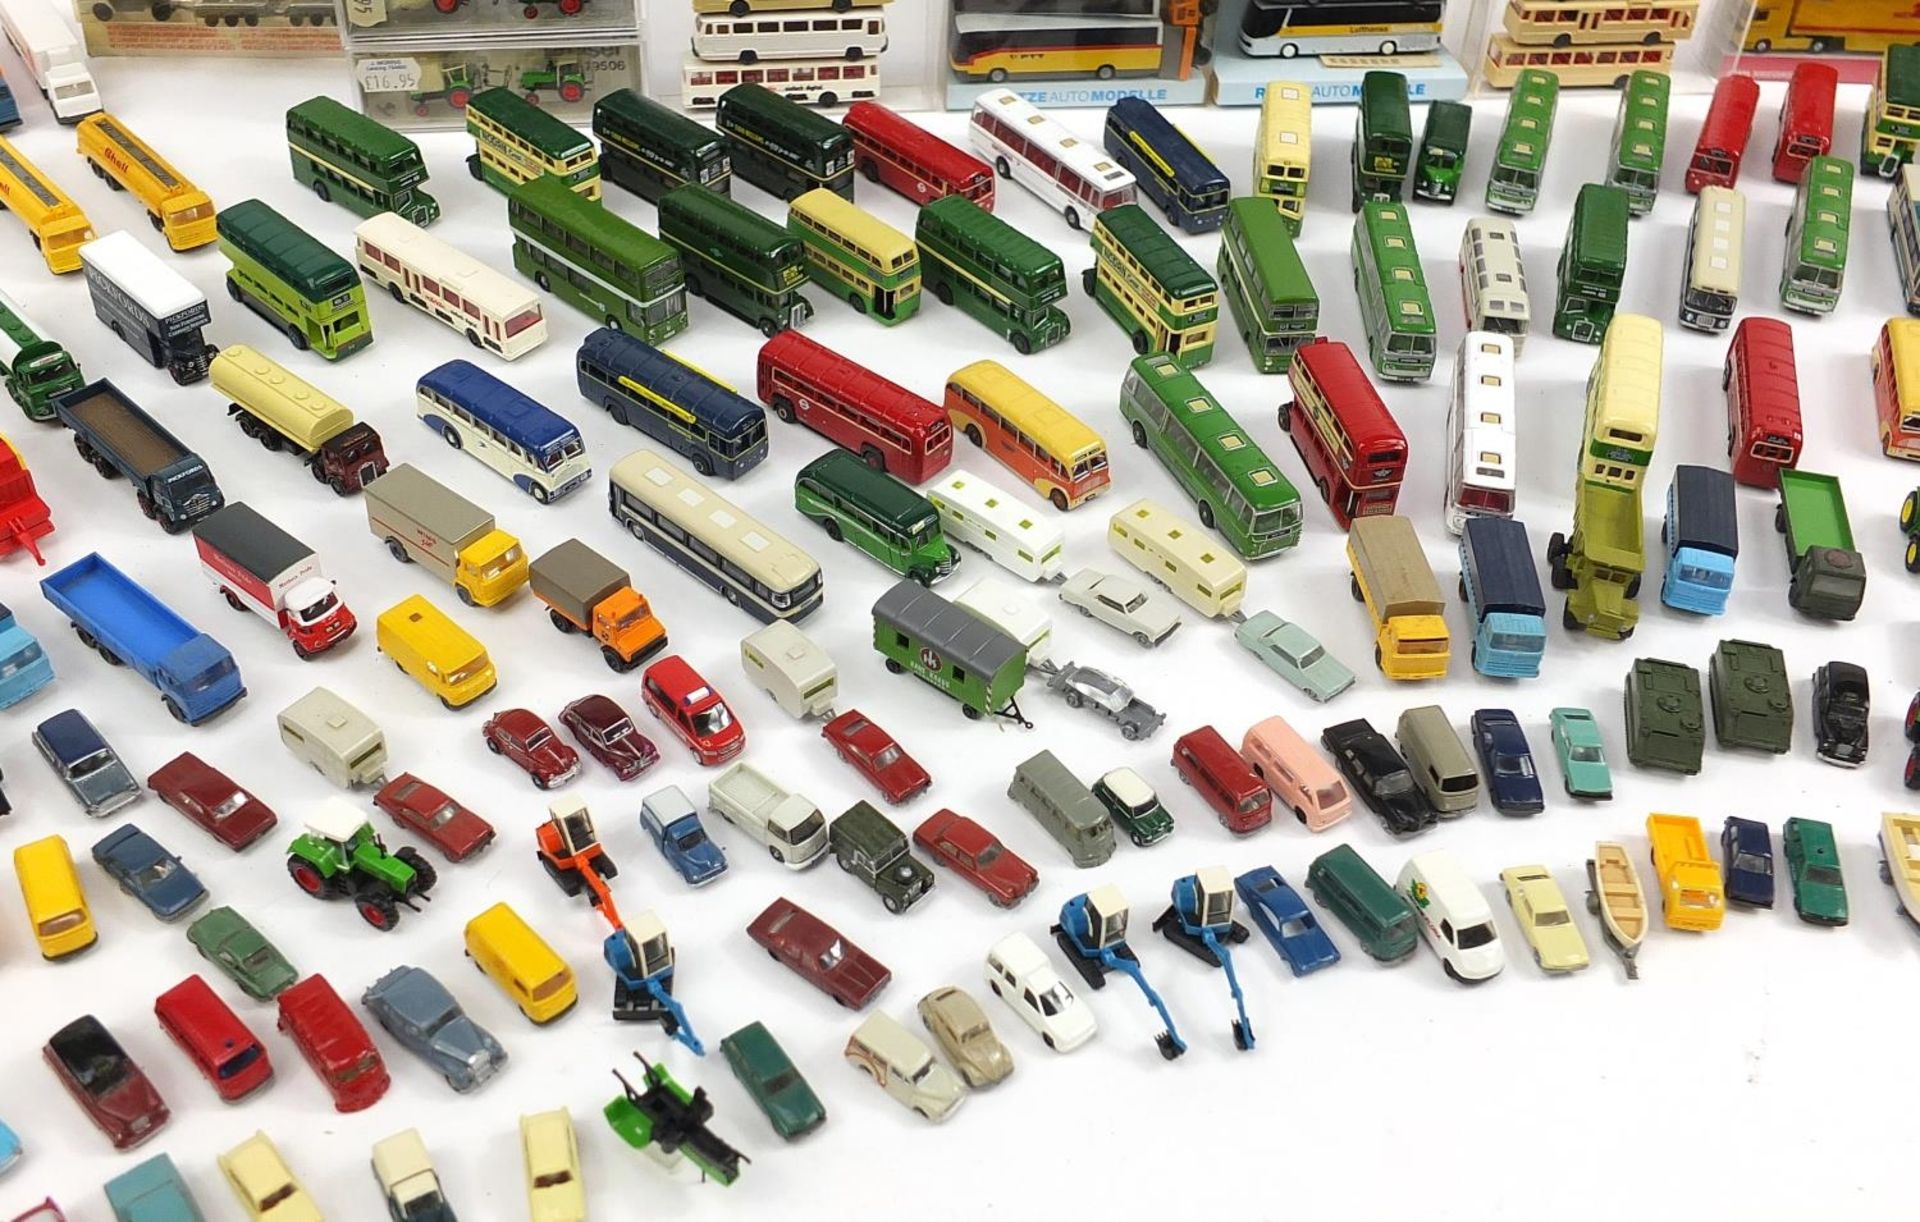 Large collection of N gauge model railway advertising vehicles, freight containers and accessories - Image 7 of 9